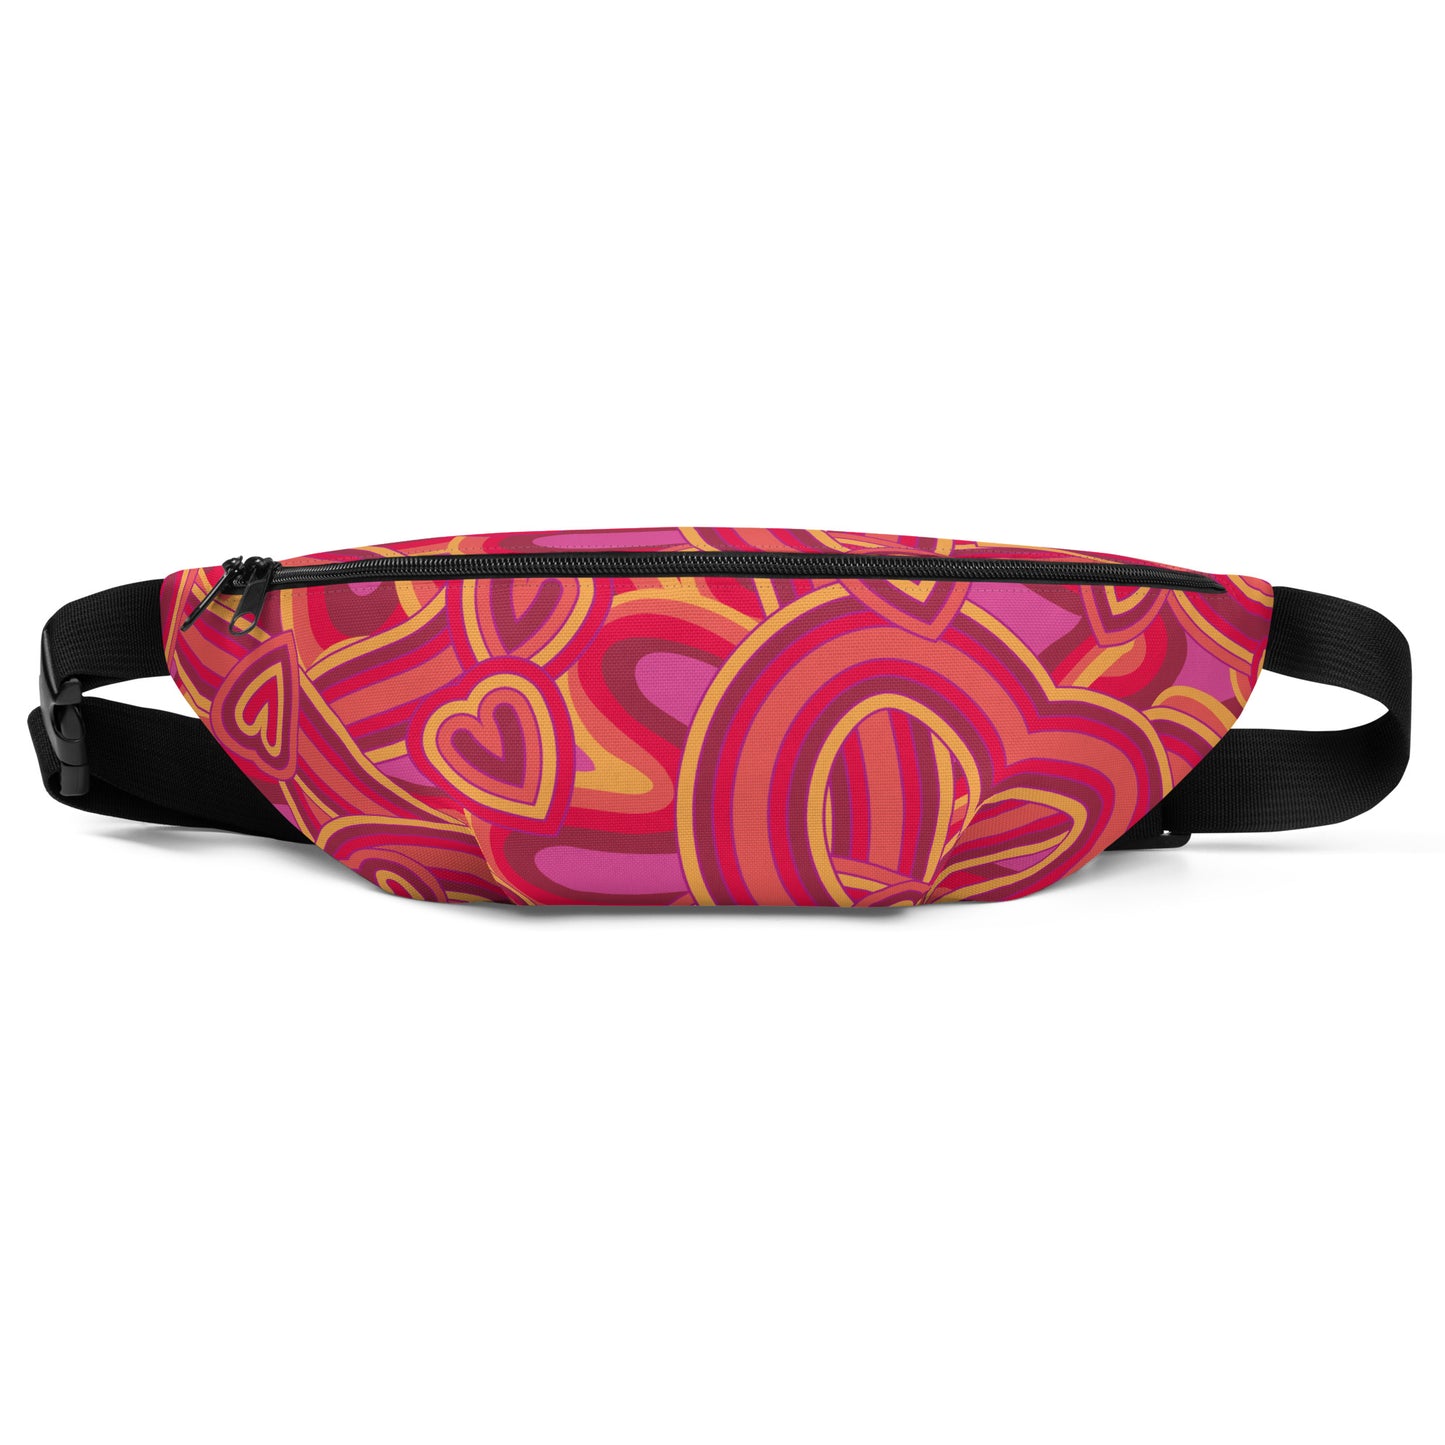 TIME OF VIBES - Fanny Pack FULL OF LOVE - €39.00